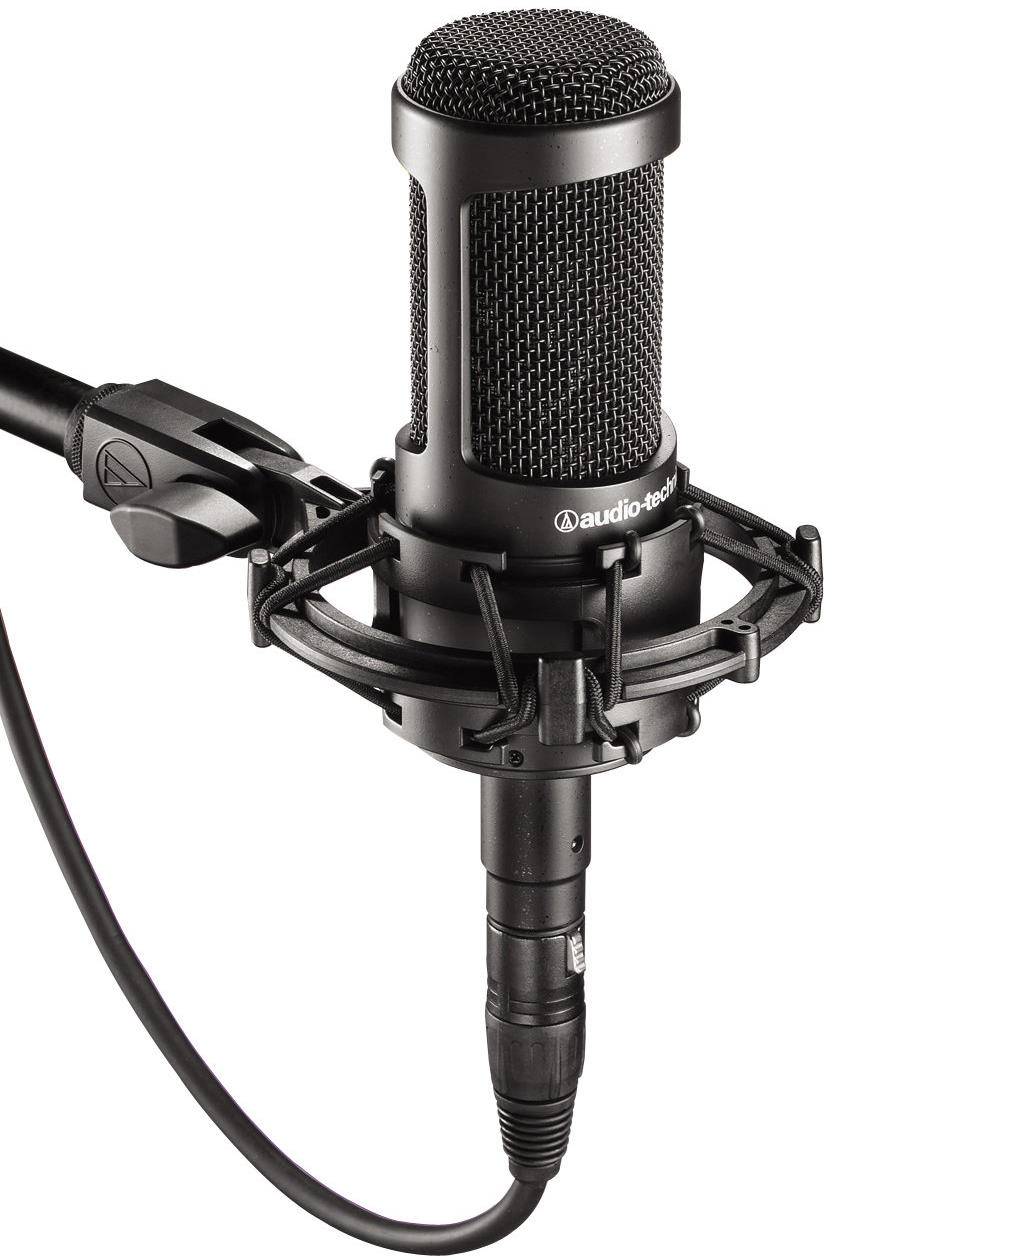 Audio Technica AT2020 Cardioid Condenser Microphone in india for best price